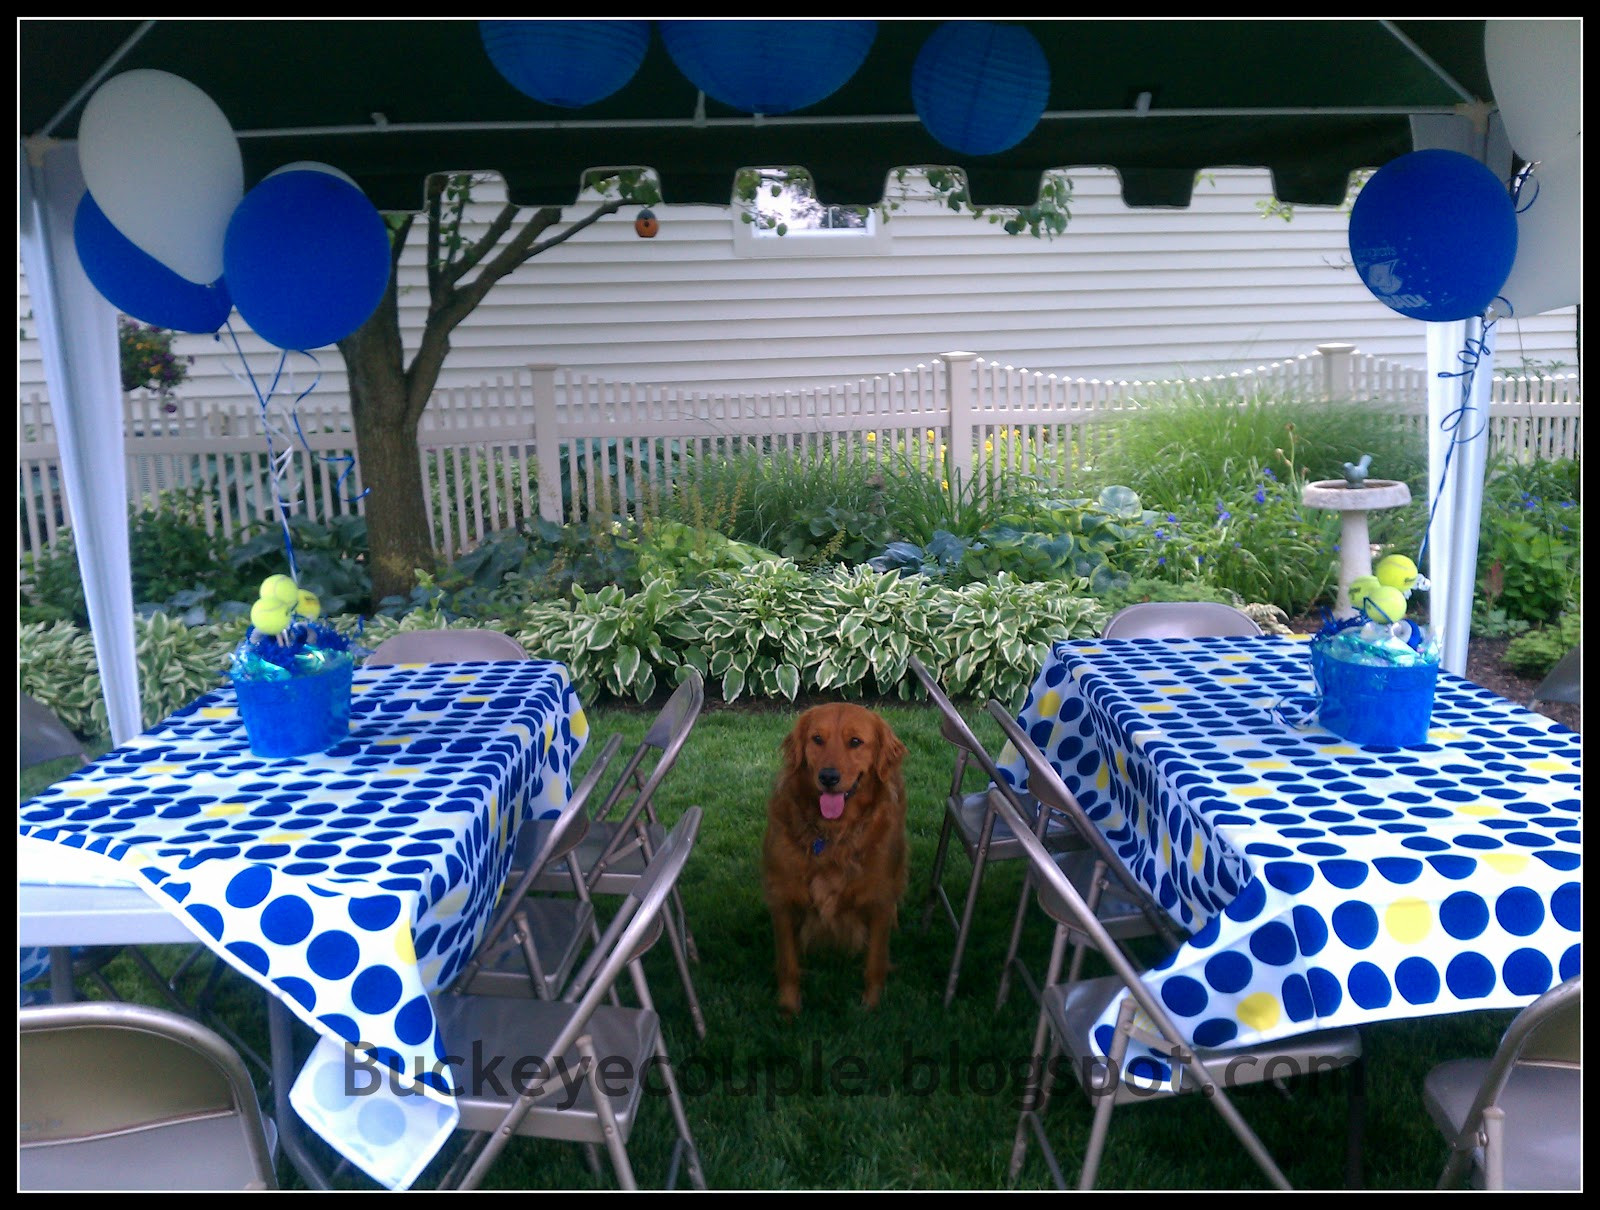 Graduation Outdoor Party Ideas
 Not So Newlyweds Graduation Party